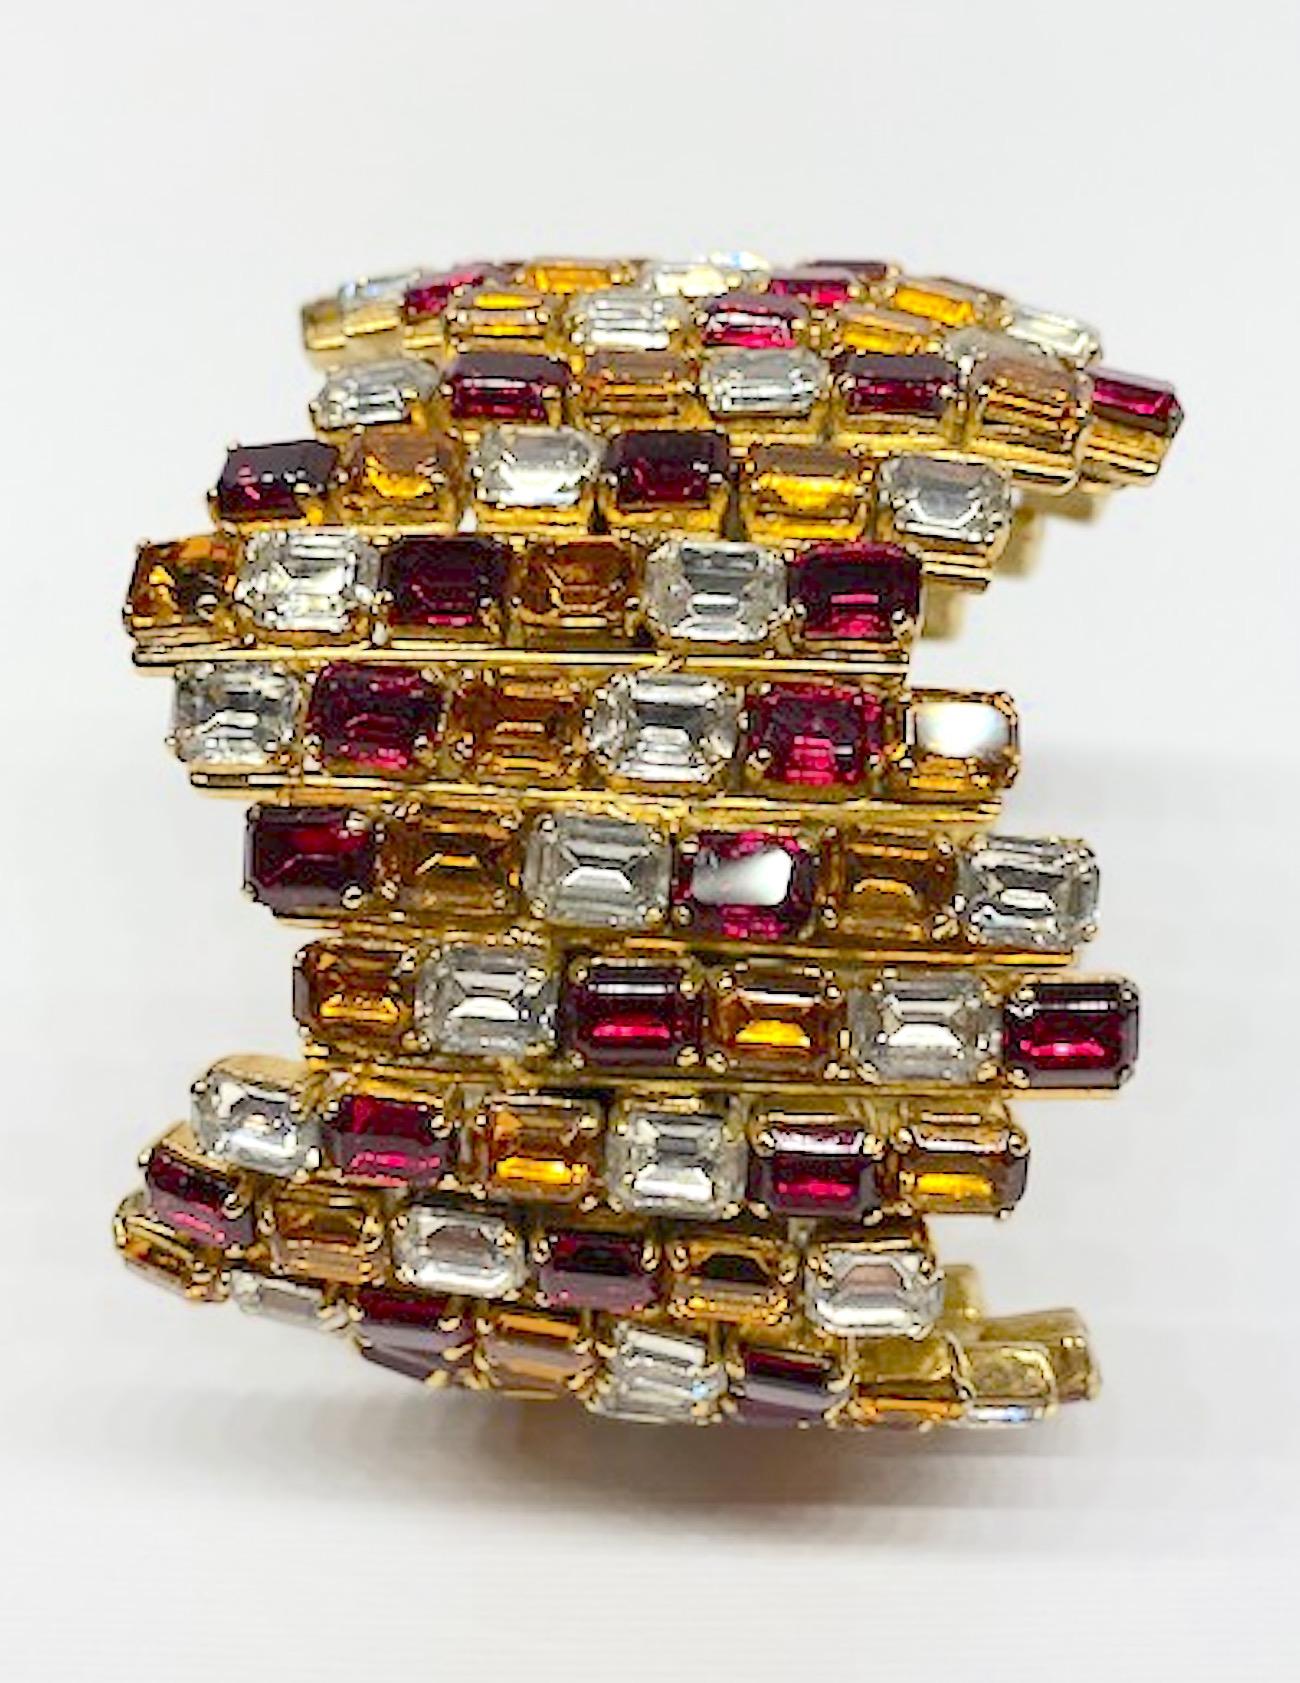 A large statement rhinestone bracelet by De Liguoro circa 1980. The cuff consists of repeating zig zag rows of gold, red and clear emerald cut rhinestones set into shiny gold plate metal. The inner length is 8 inches with 1/2 inch opening. The outer